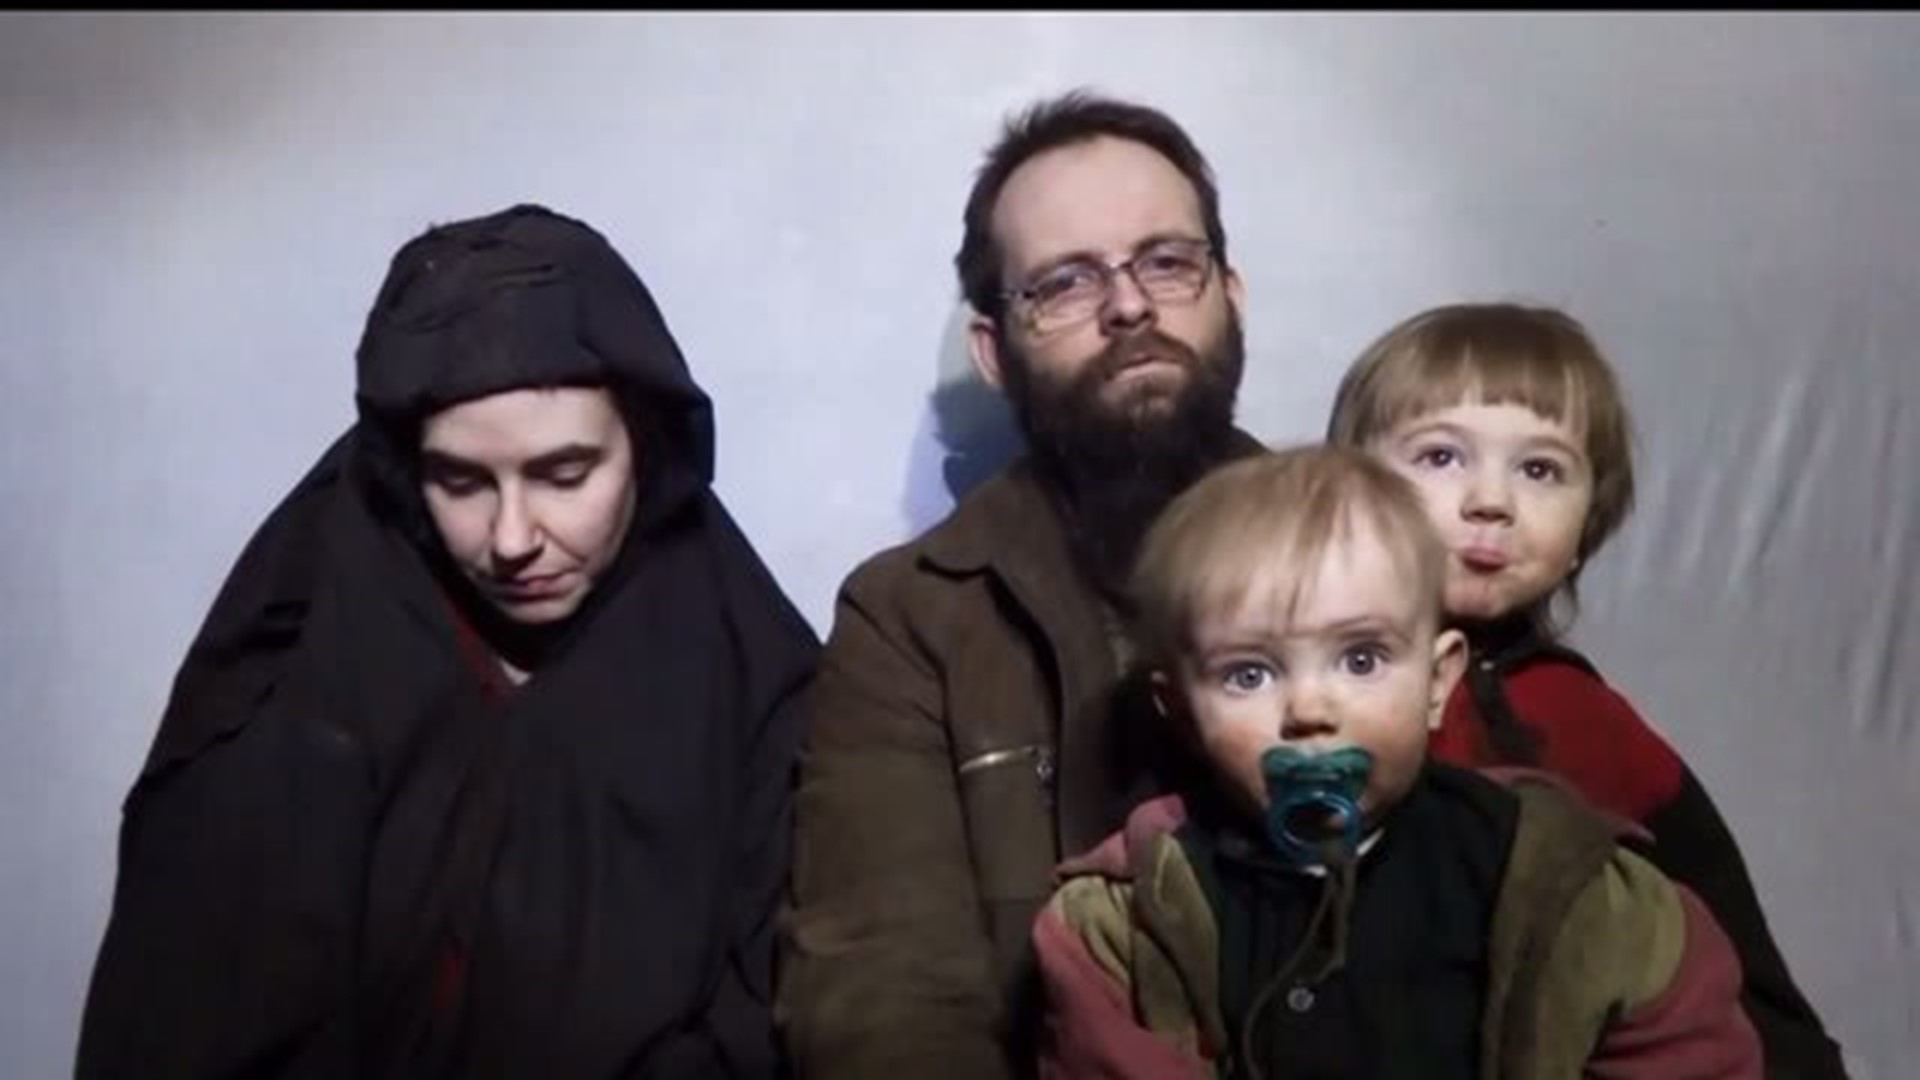 Taliban releases new video of York County family held captive